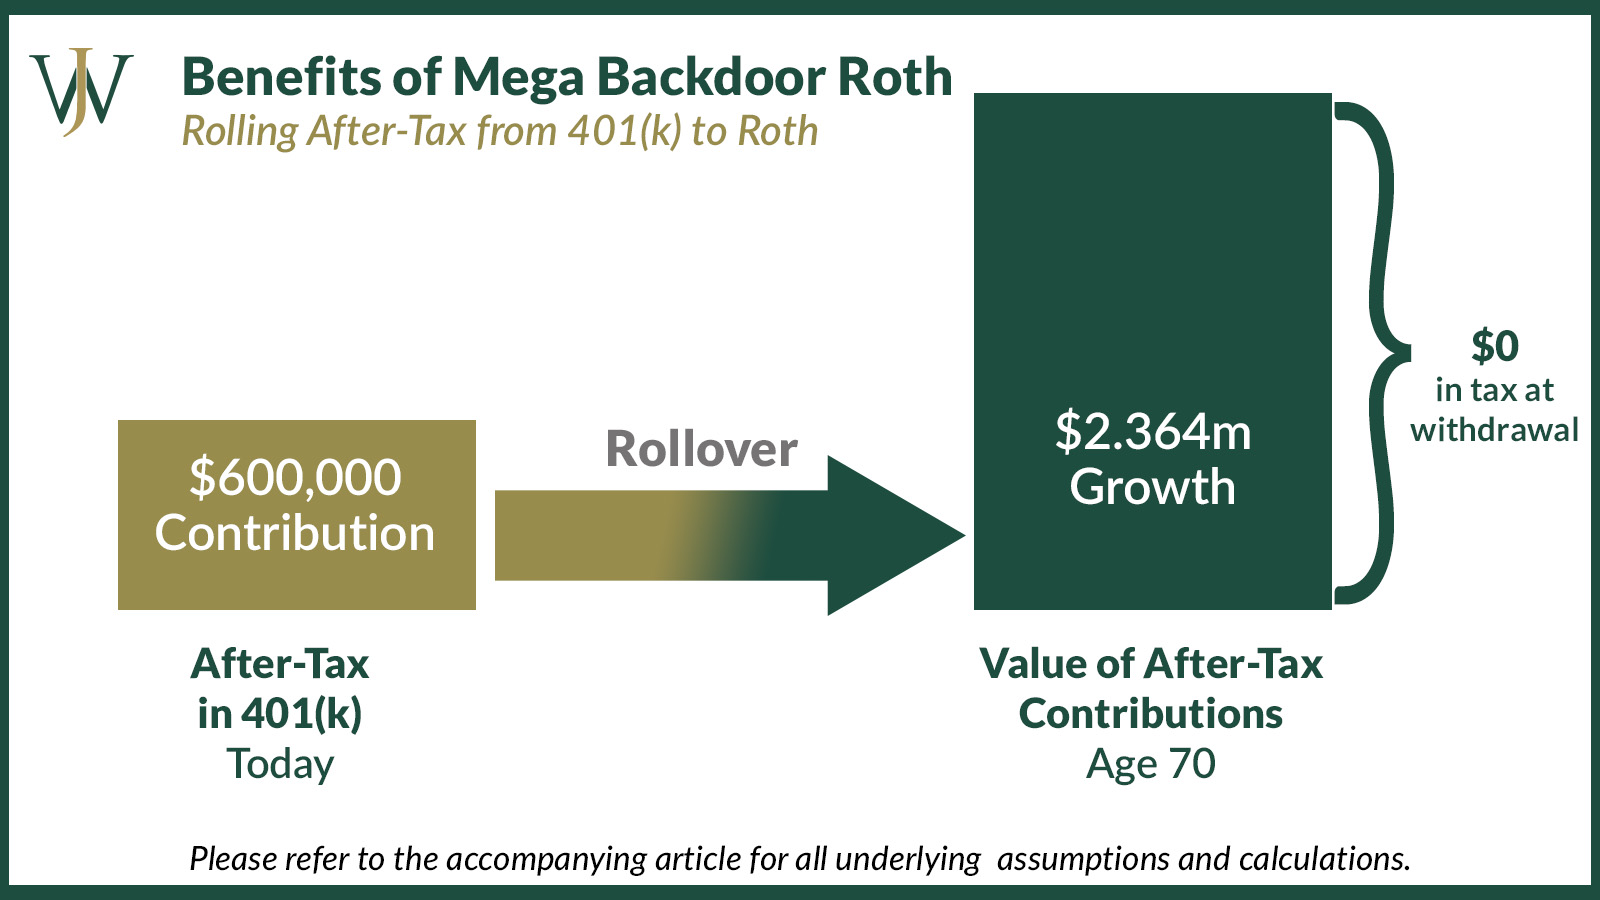 How Mega Backdoor Roth Contributions Can Boost Your Retirement Savings